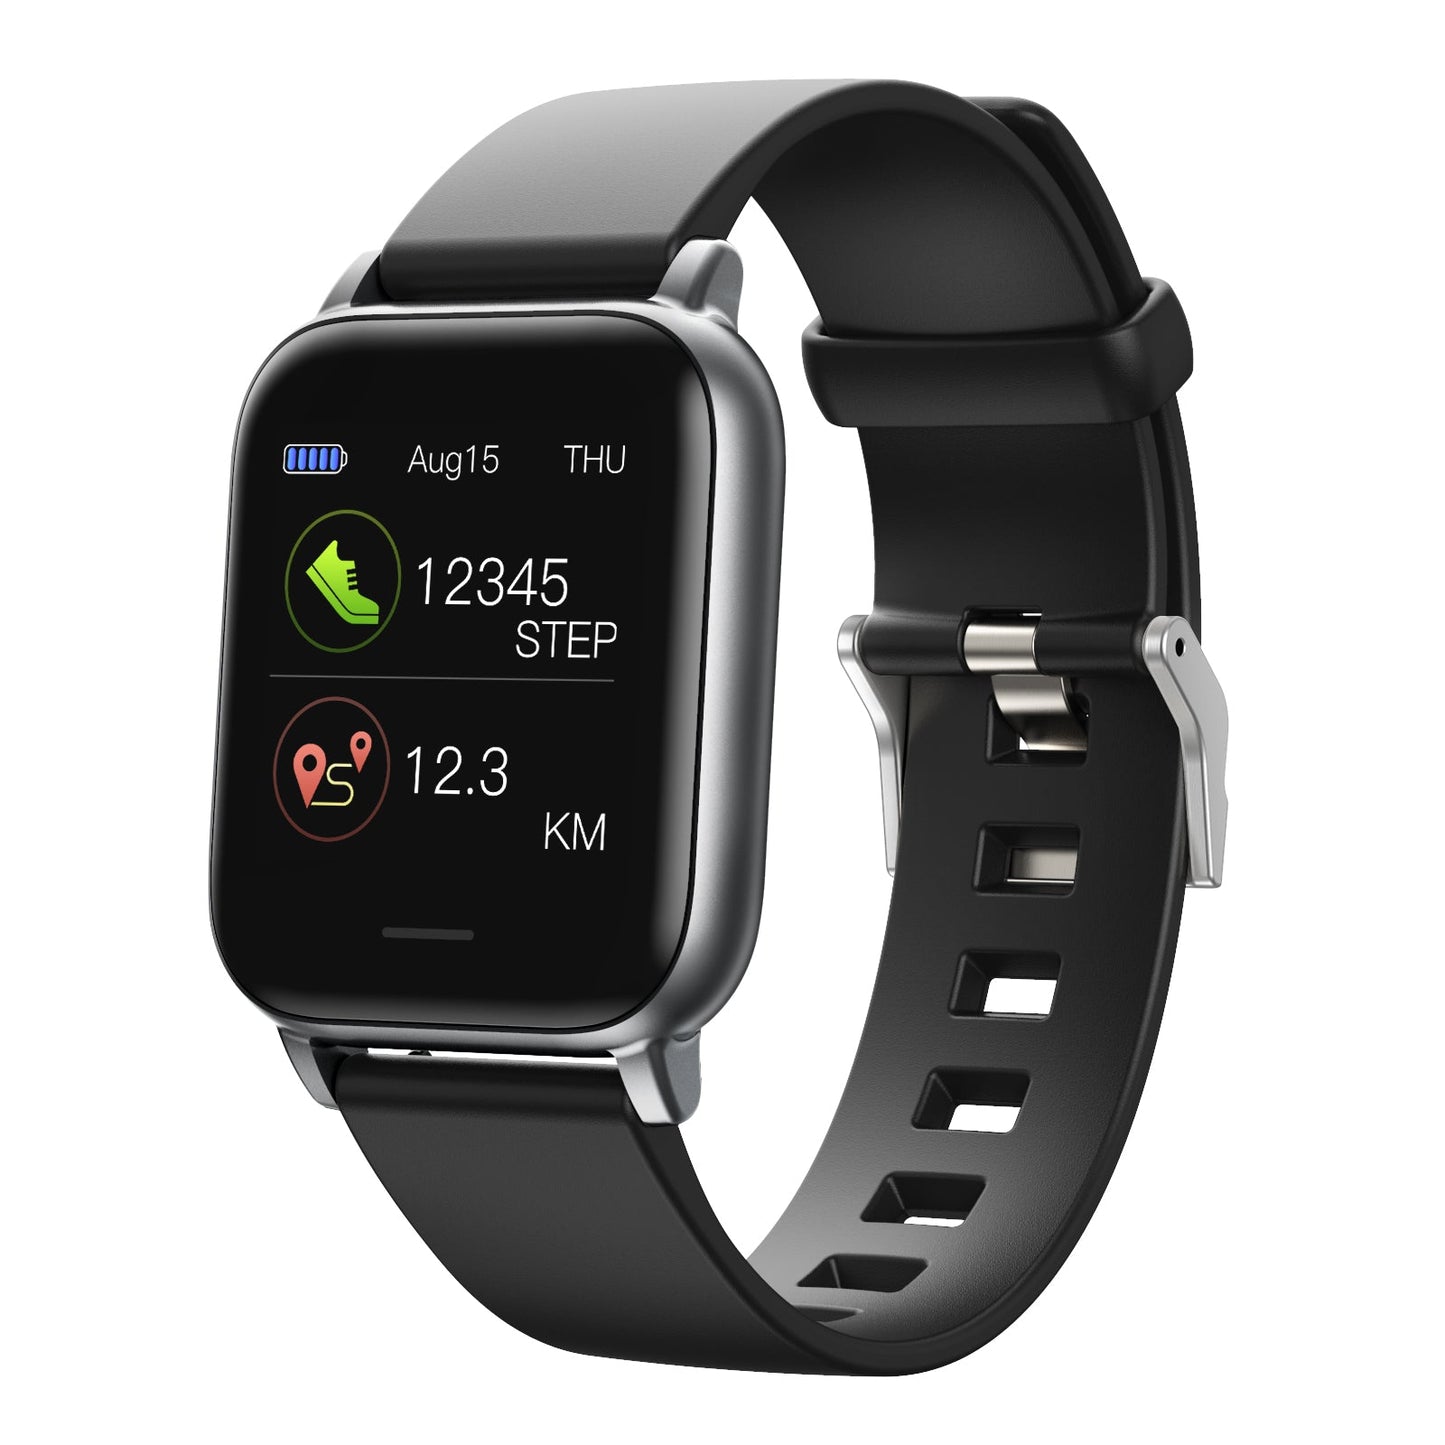 IP68 Waterproof Factory OEM Customized Fitness Heart Rate S50 Sport Health Monitoring Smartwatch Reloj Android Smart Watch baby magazin 